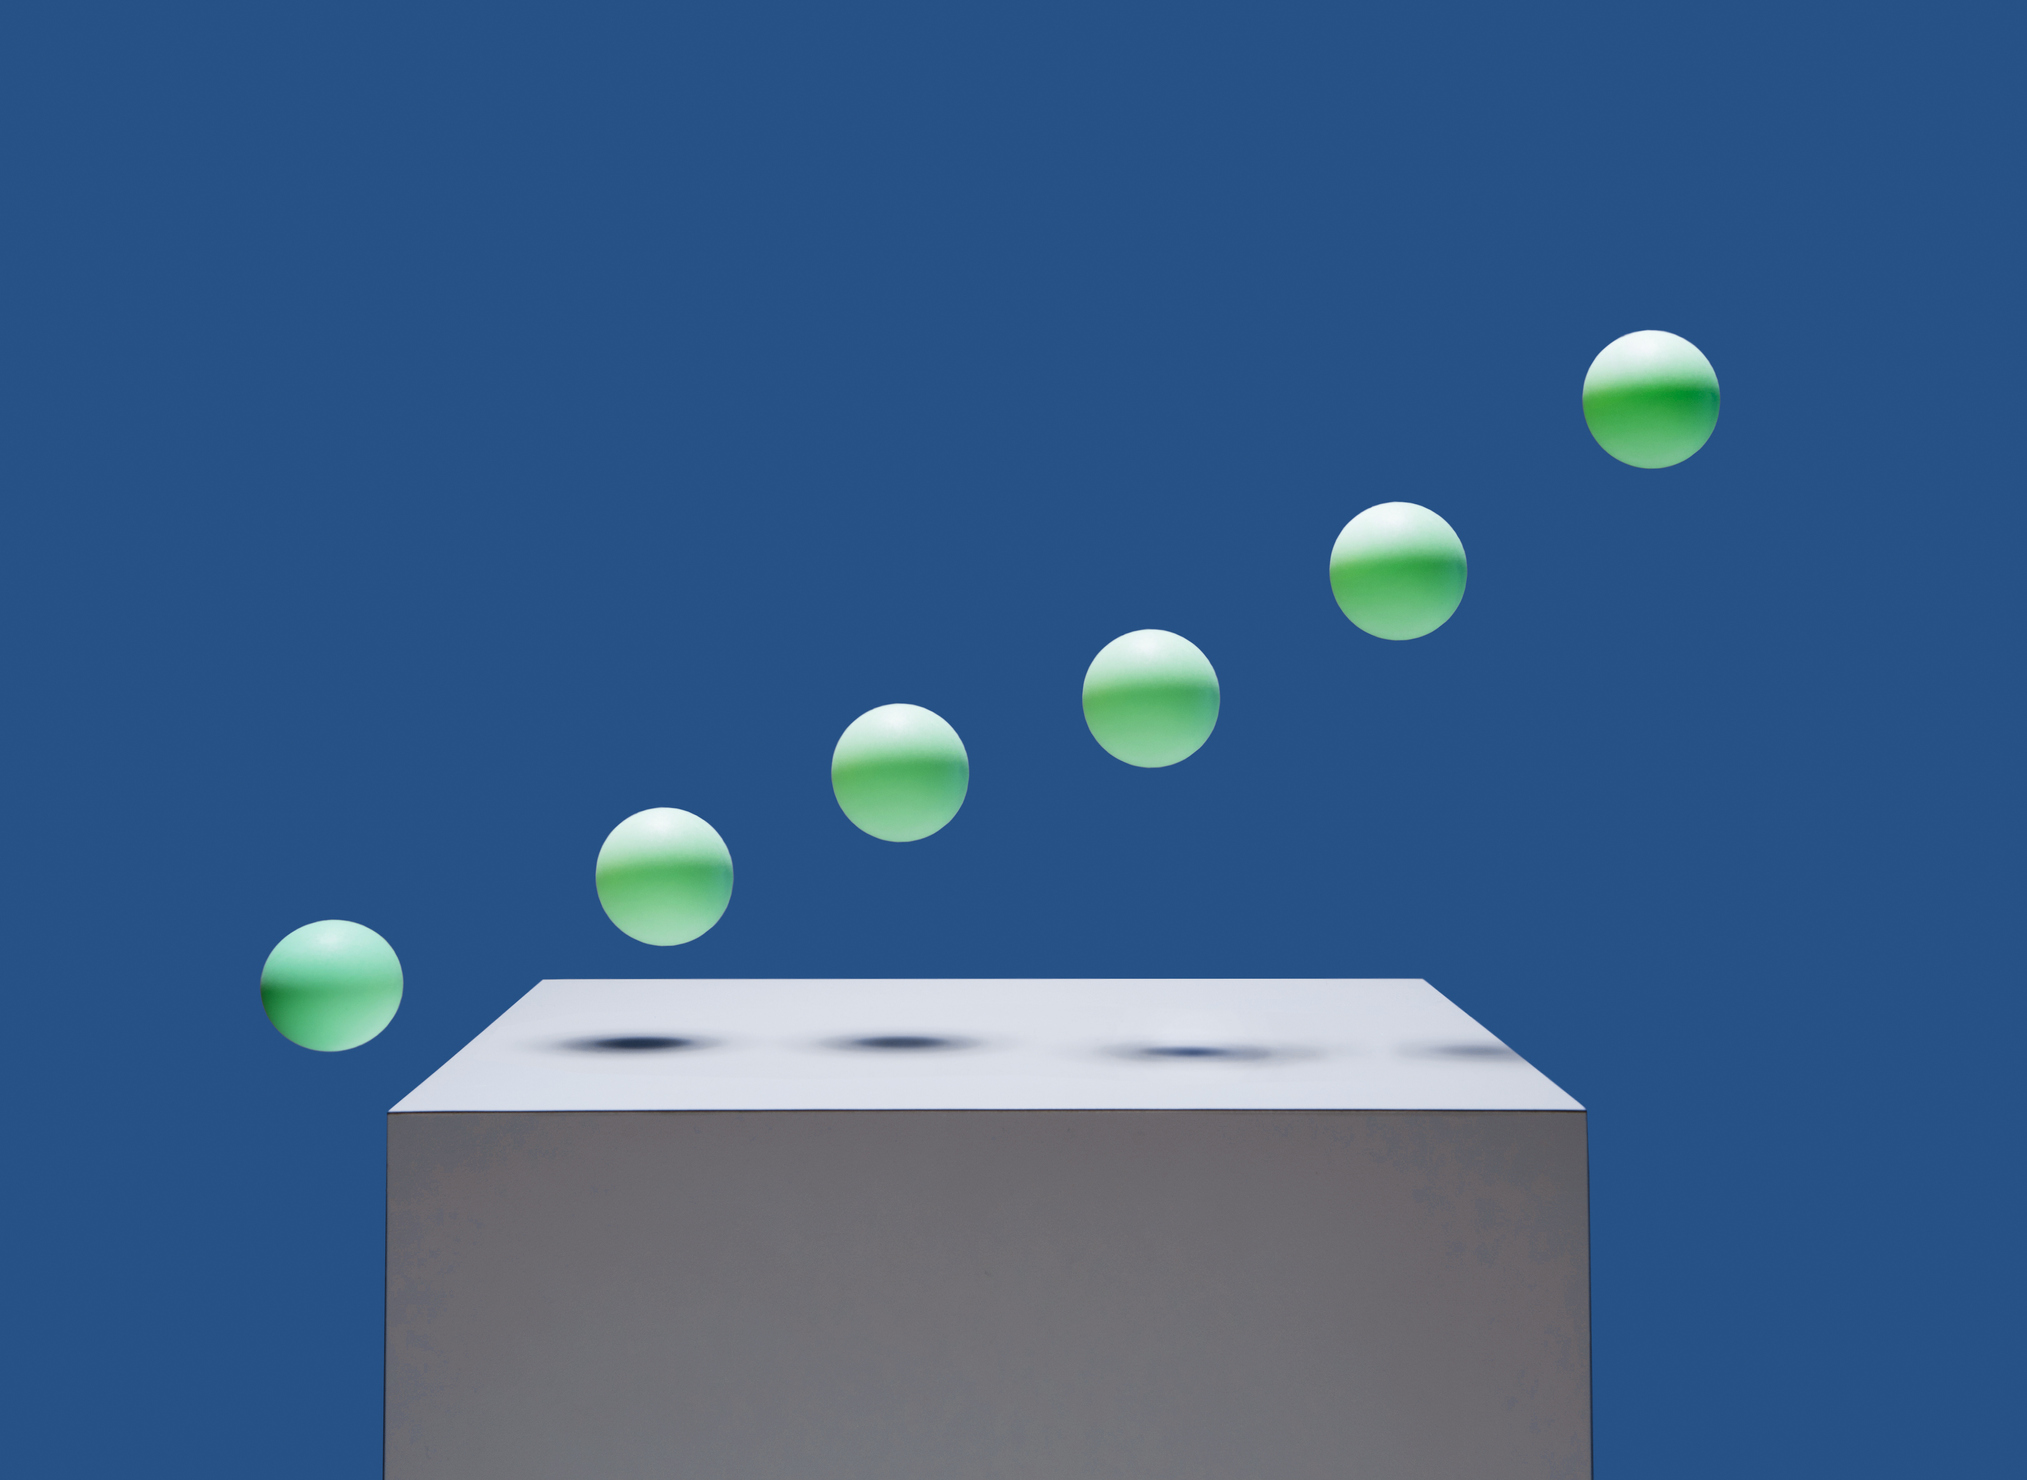 6 green balls bouncing off of white box in ascending order, blue background